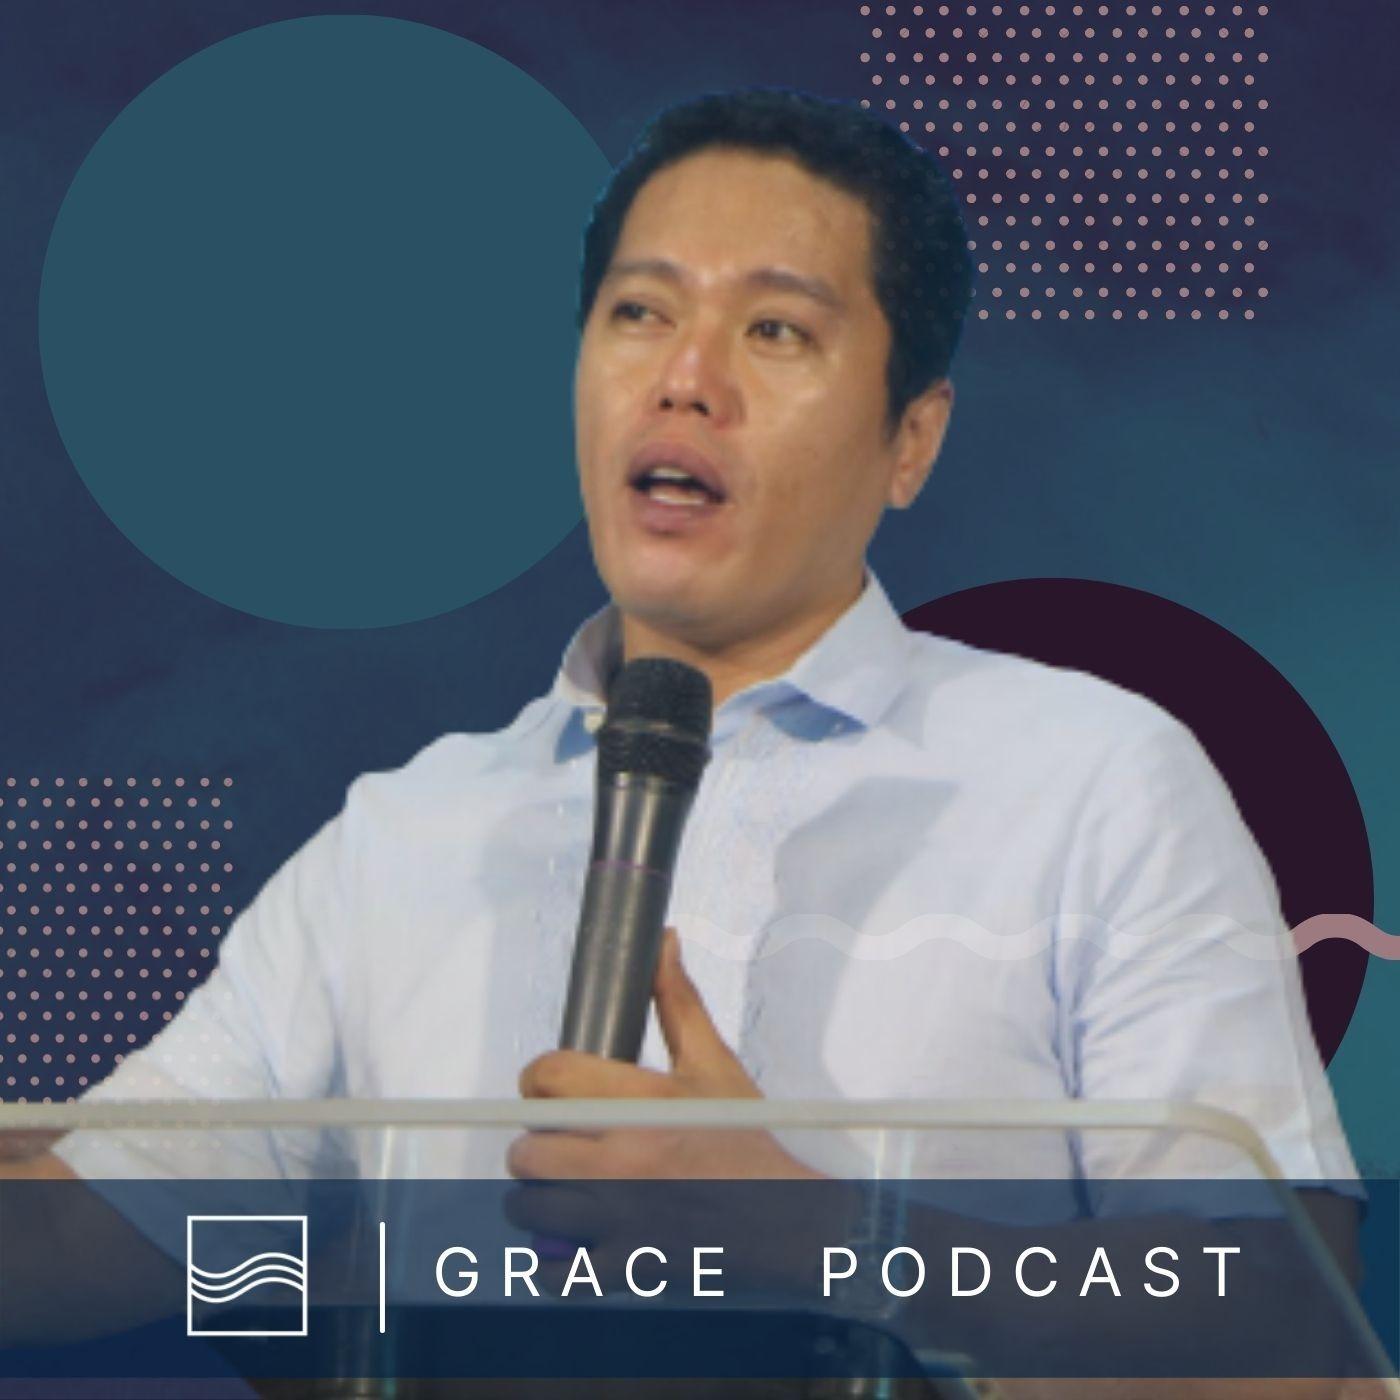 Grace Podcast with Ptr. Walter M. Tabor